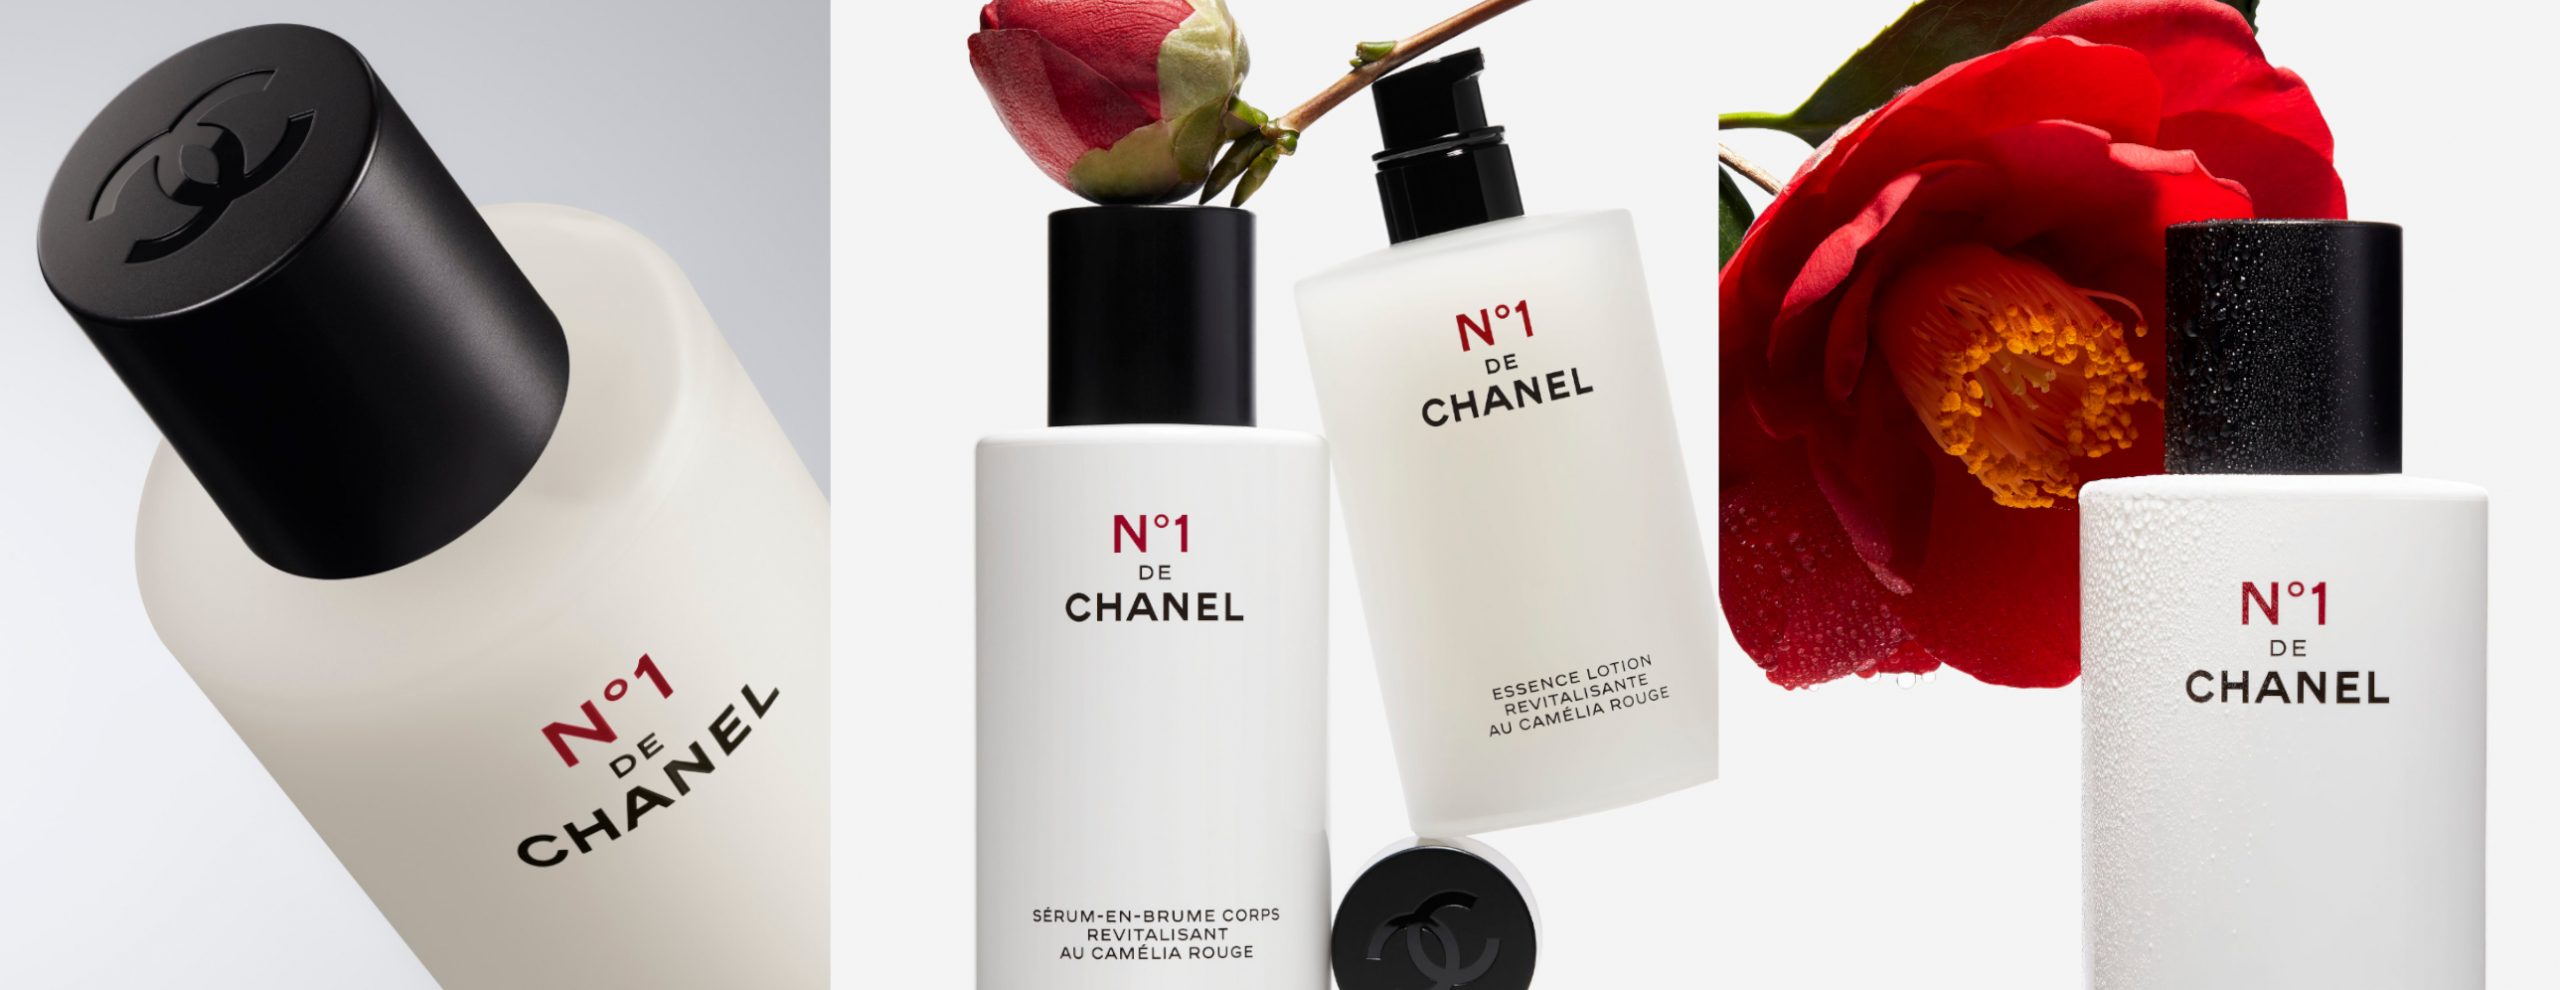 N1 DE CHANEL REVITALIZING SERUM Prevents And Corrects The Appearance Of  The Signs Of Aging CHANEL  lupongovph